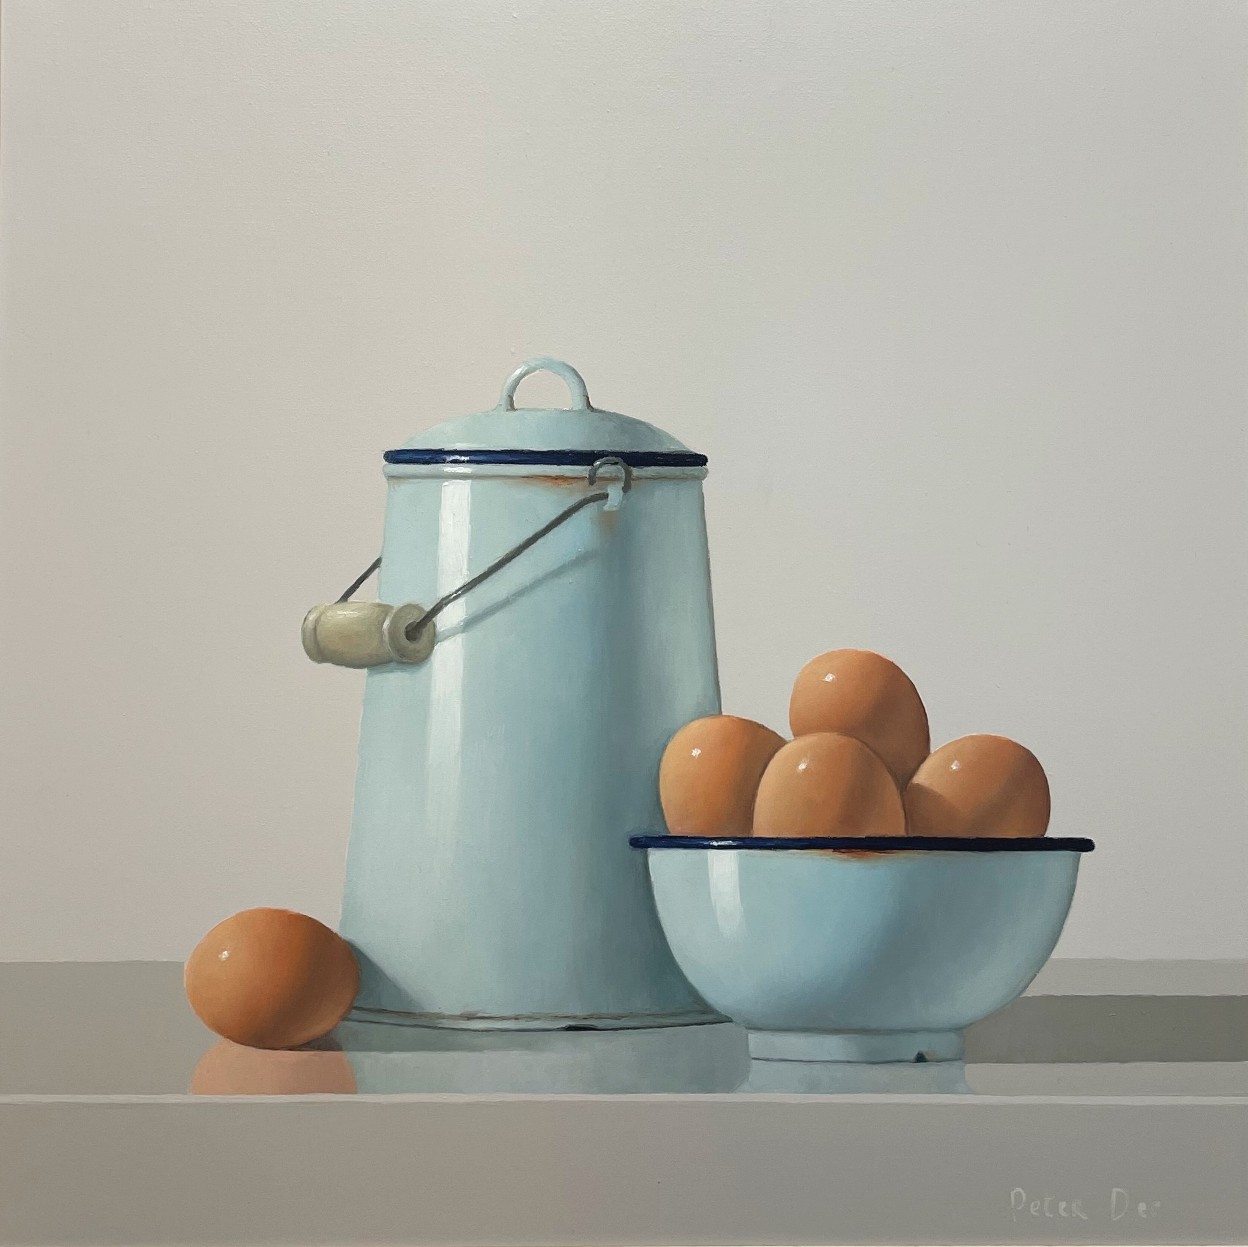 Vintage Milk Pail with Eggs by Peter Dee